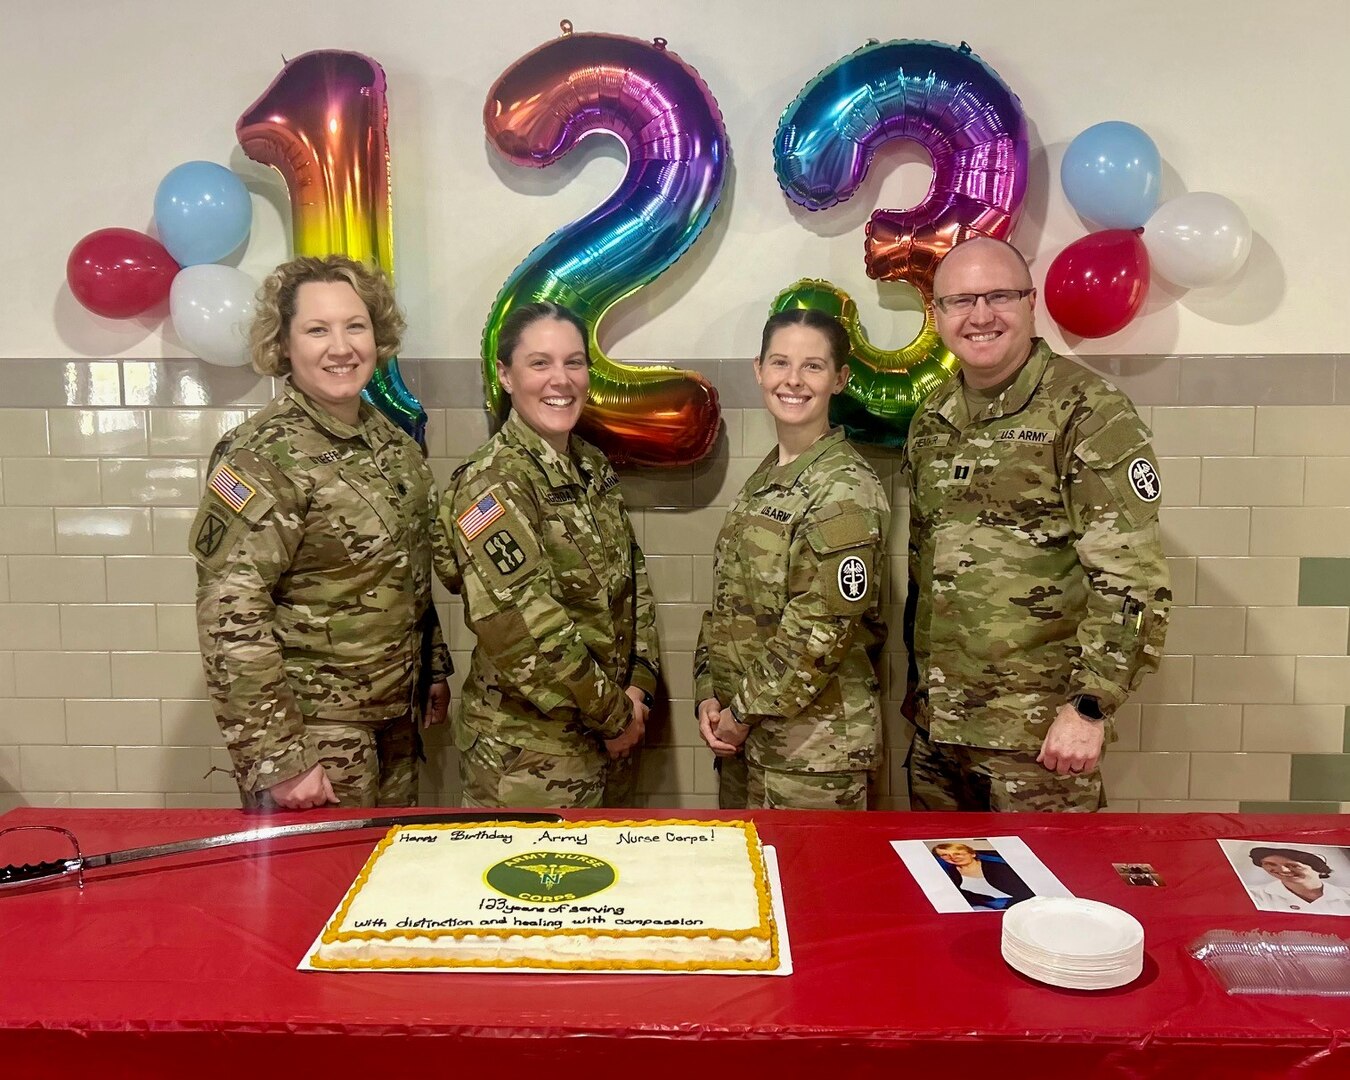 Four Army Nurse Corps Officers standing in front of a birthday cake celebrating the ANC Birthday